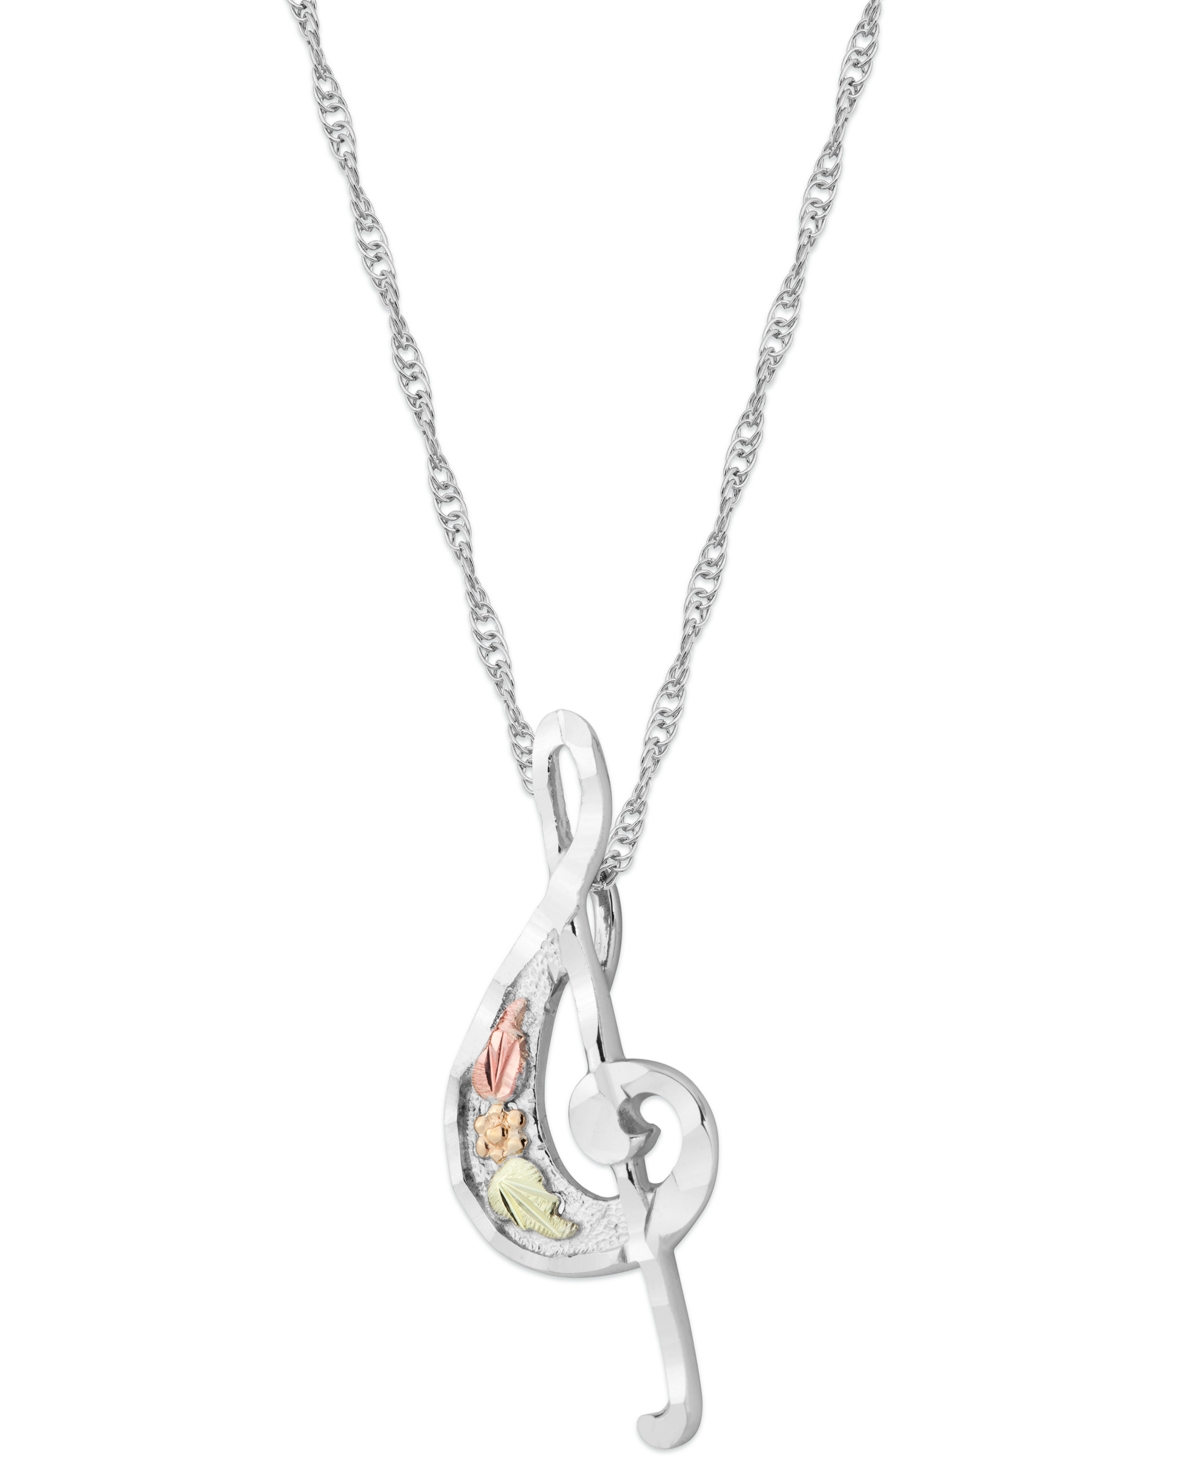 Treble Clef Pendant in Sterling Silver with 12k Rose and Green Gold - Ss